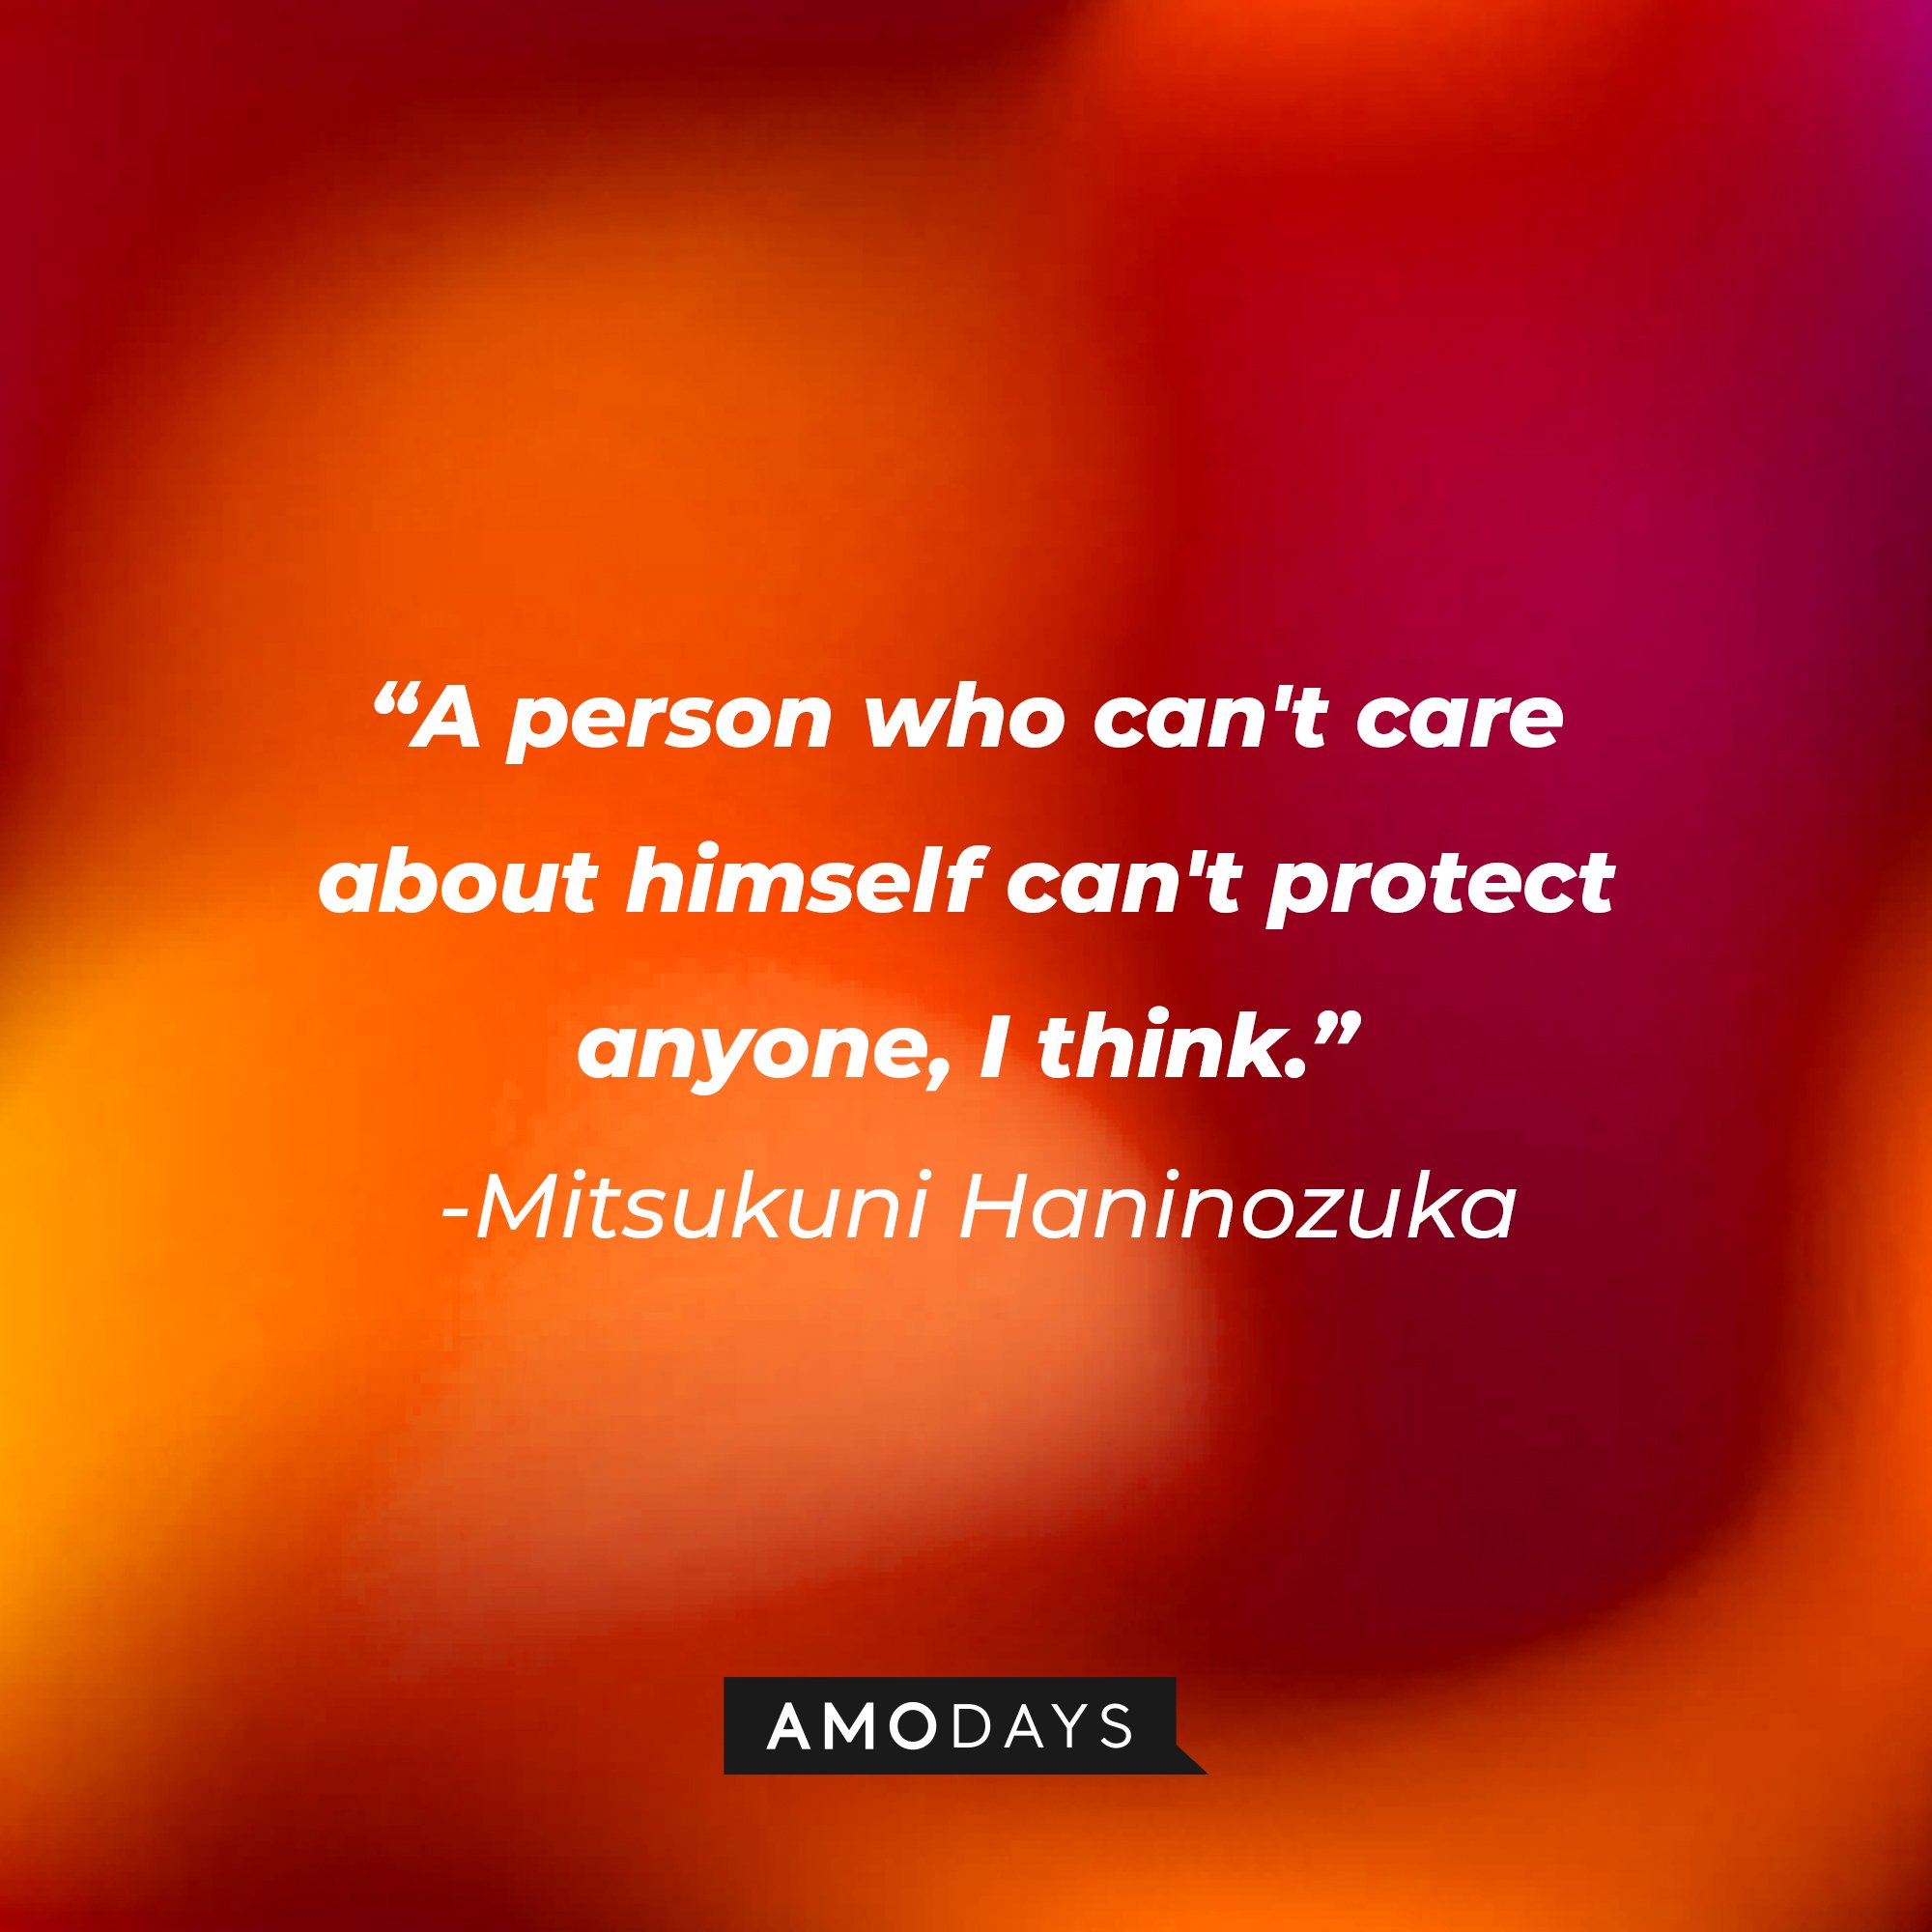 Mitsukuni Haninozuka’s quote: "A person who can't care about himself can't protect anyone, I think." | Image: AmoDays